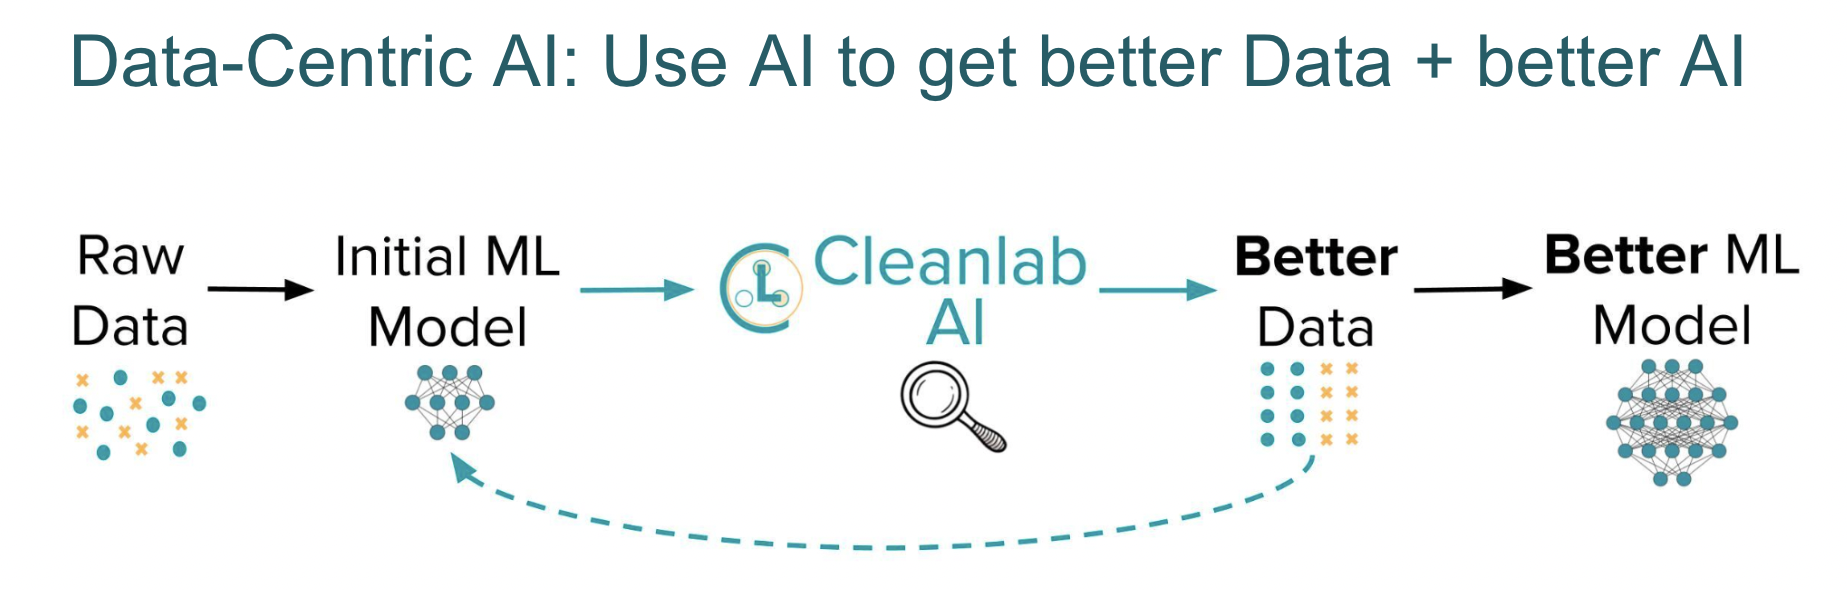 Data-Centric AI pipeline to use AI to get better Data + better AI